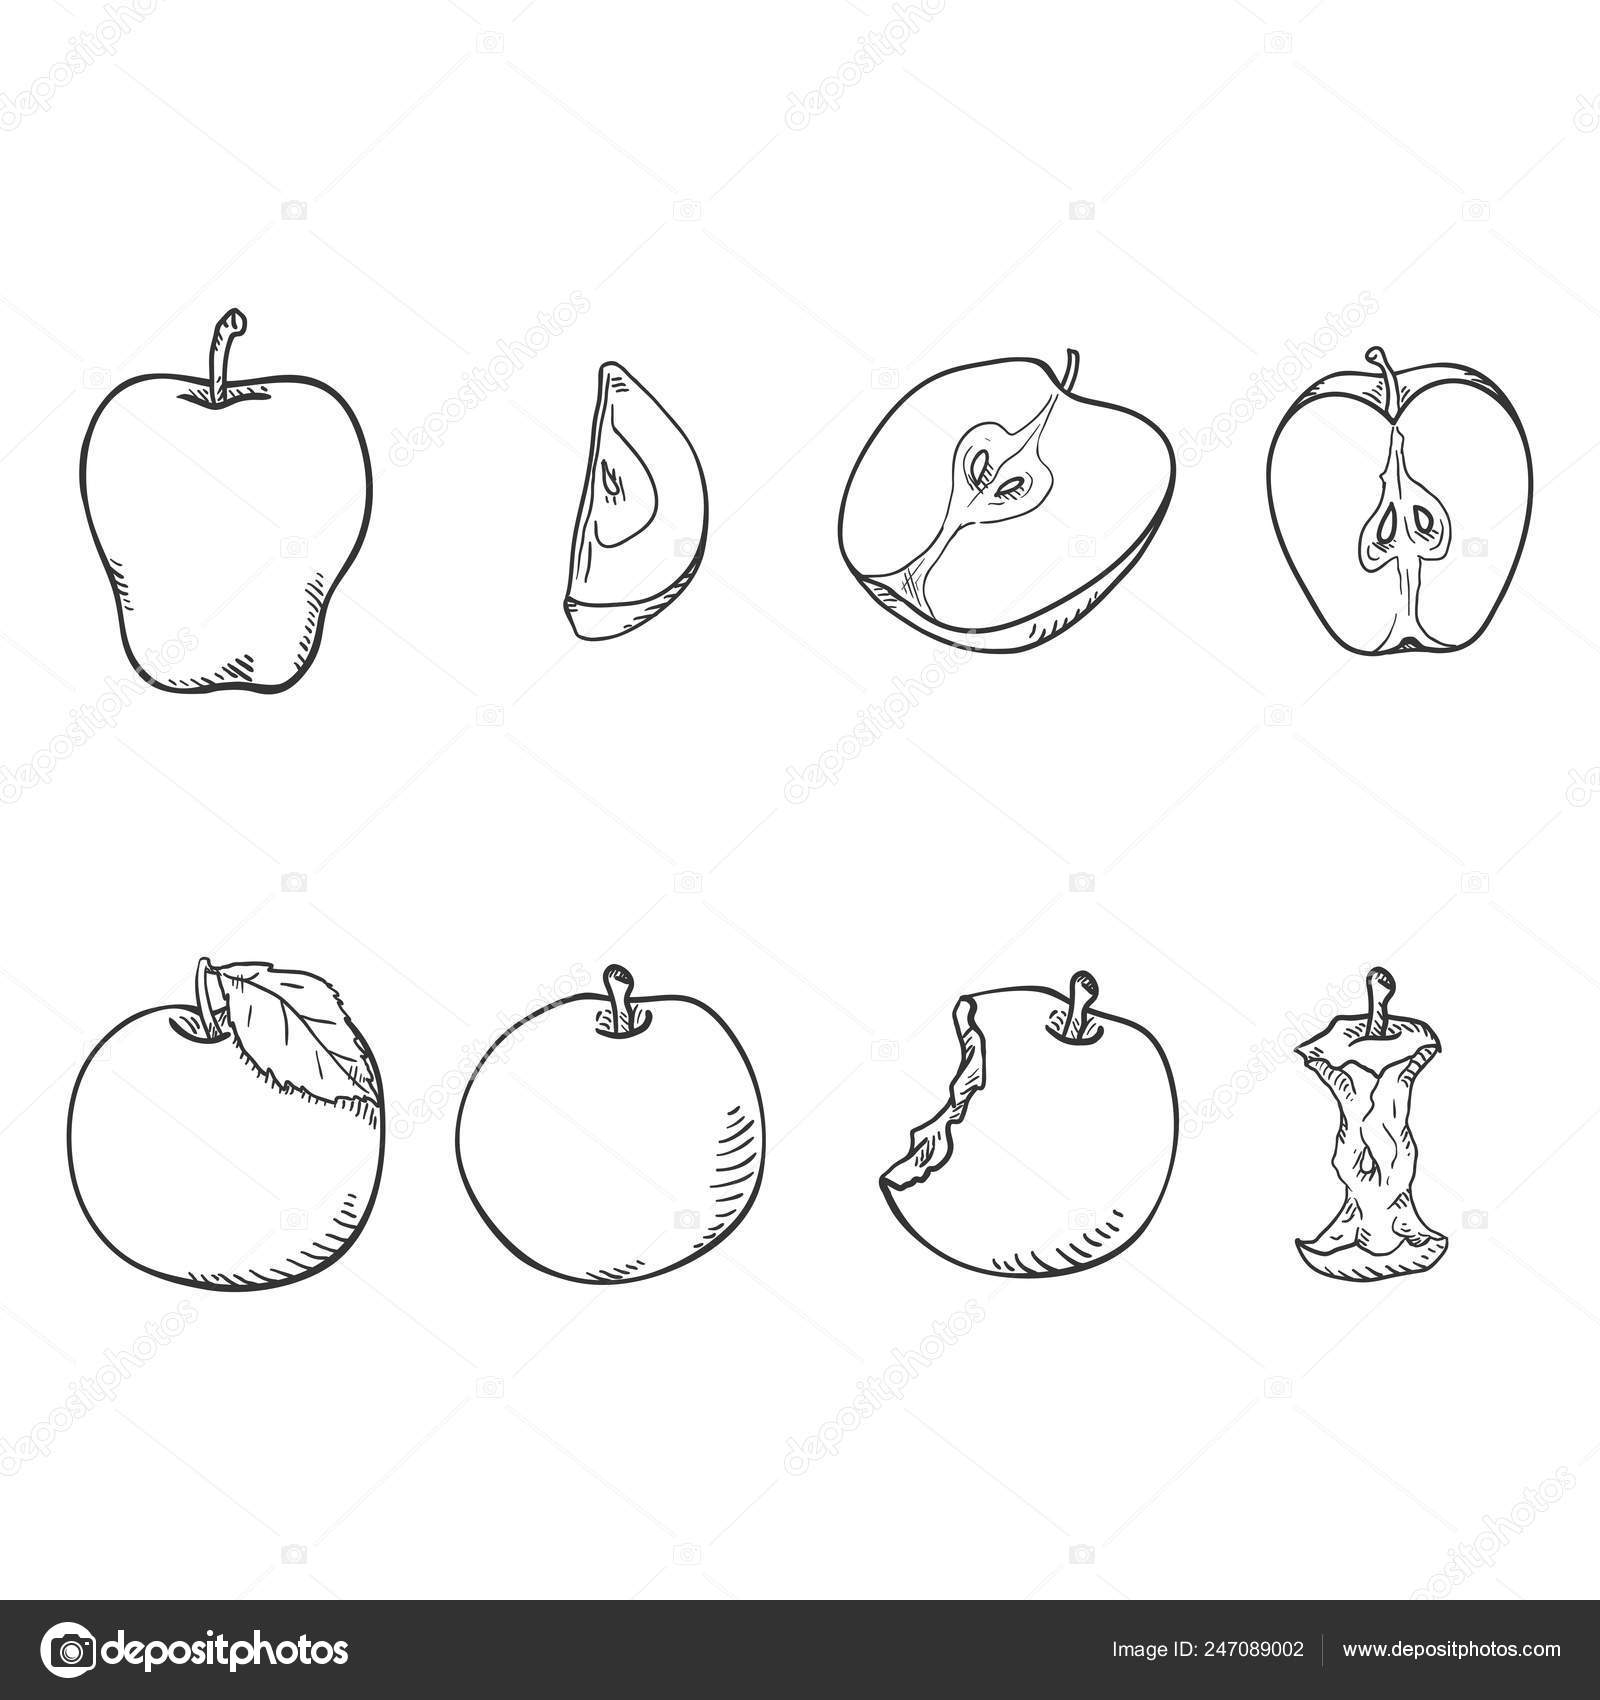 How to draw an apple with a pencil step-by-step drawing tutorial